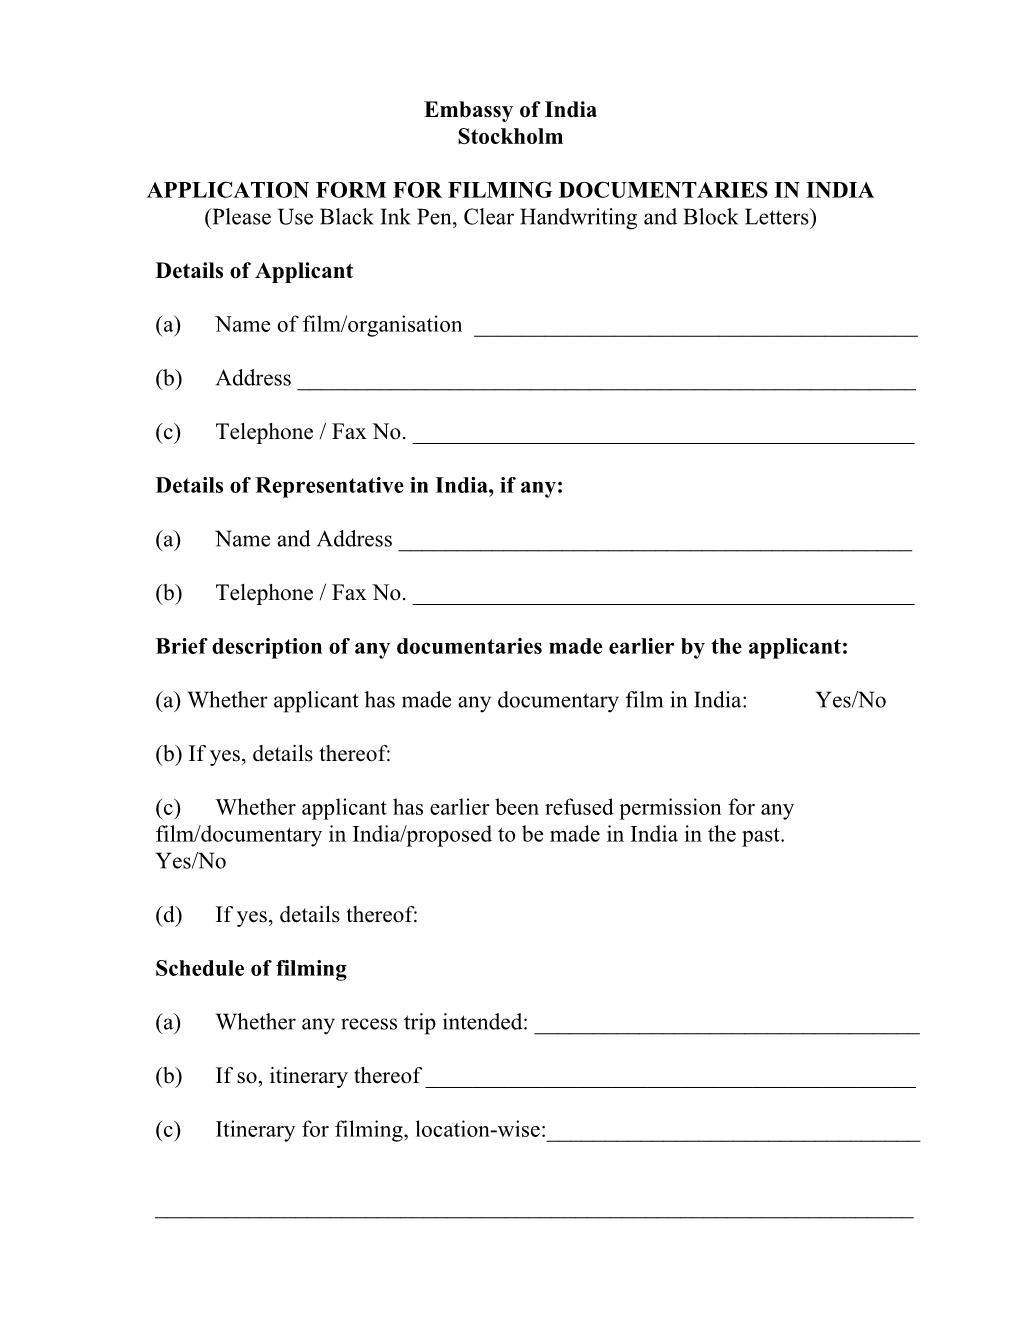 For Applicants to Fill